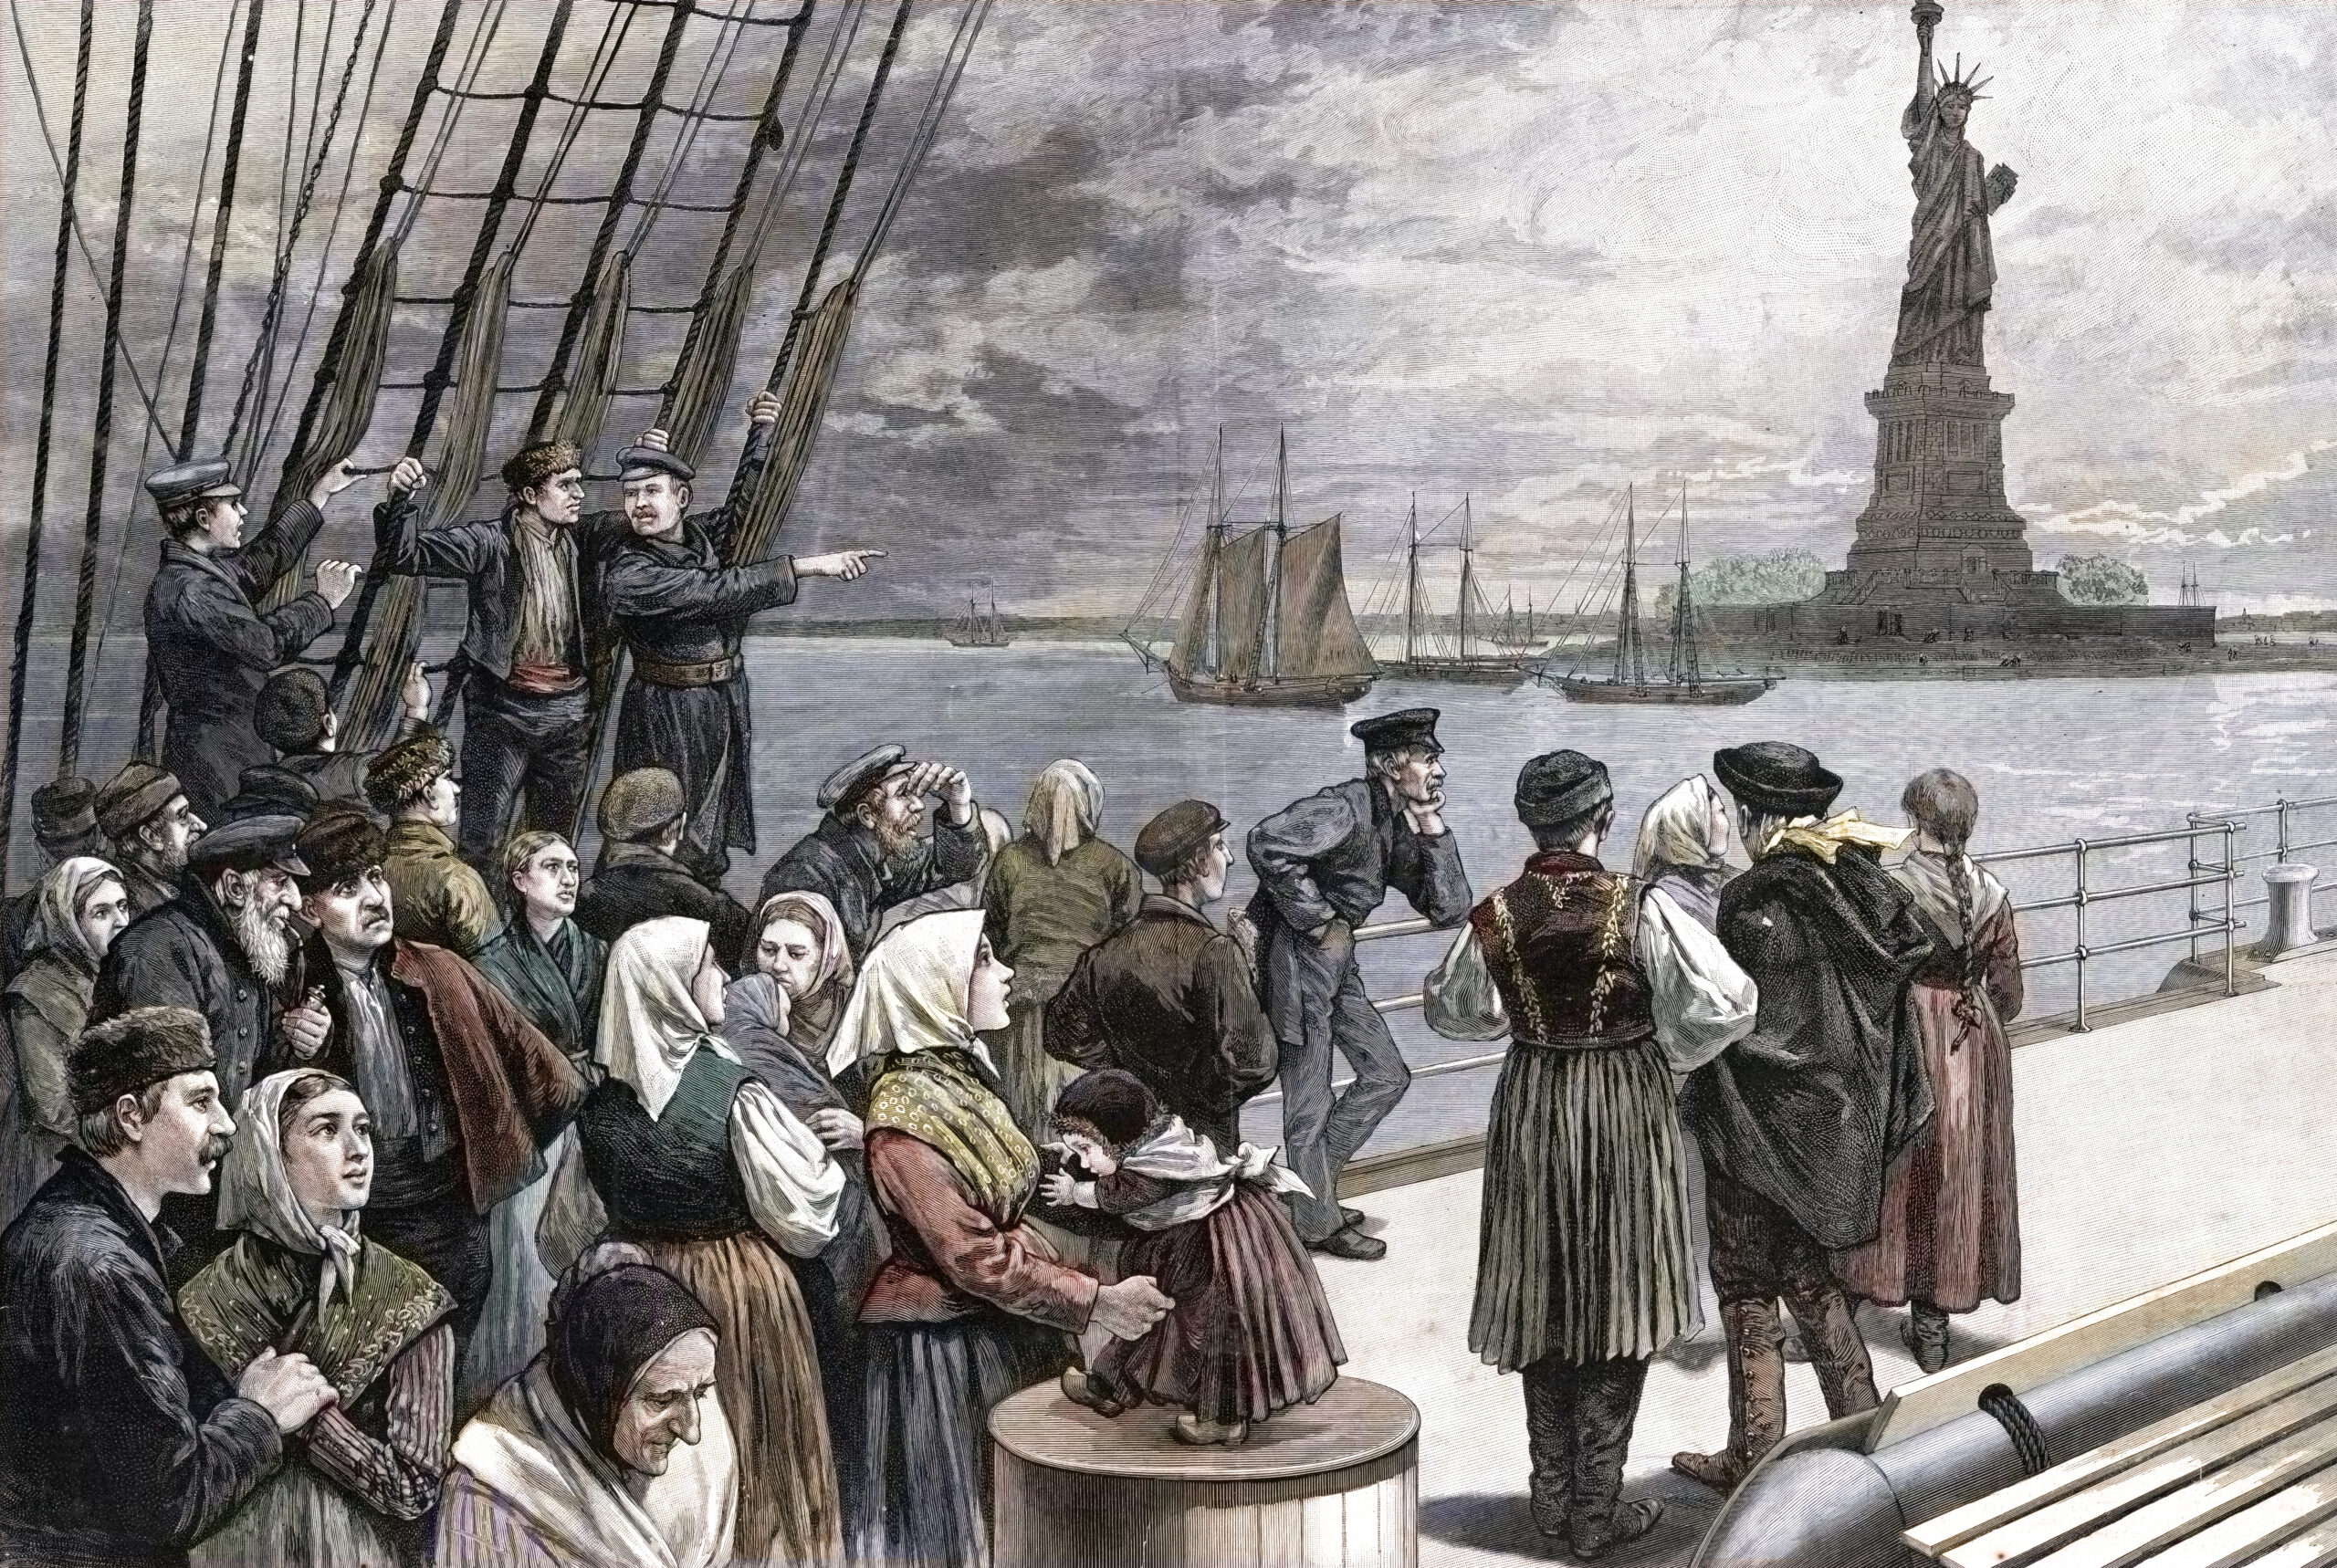 Engraving of immigrants arriving in New York harbor in the 1800s, people on a ship with the statue of liberty in the background.